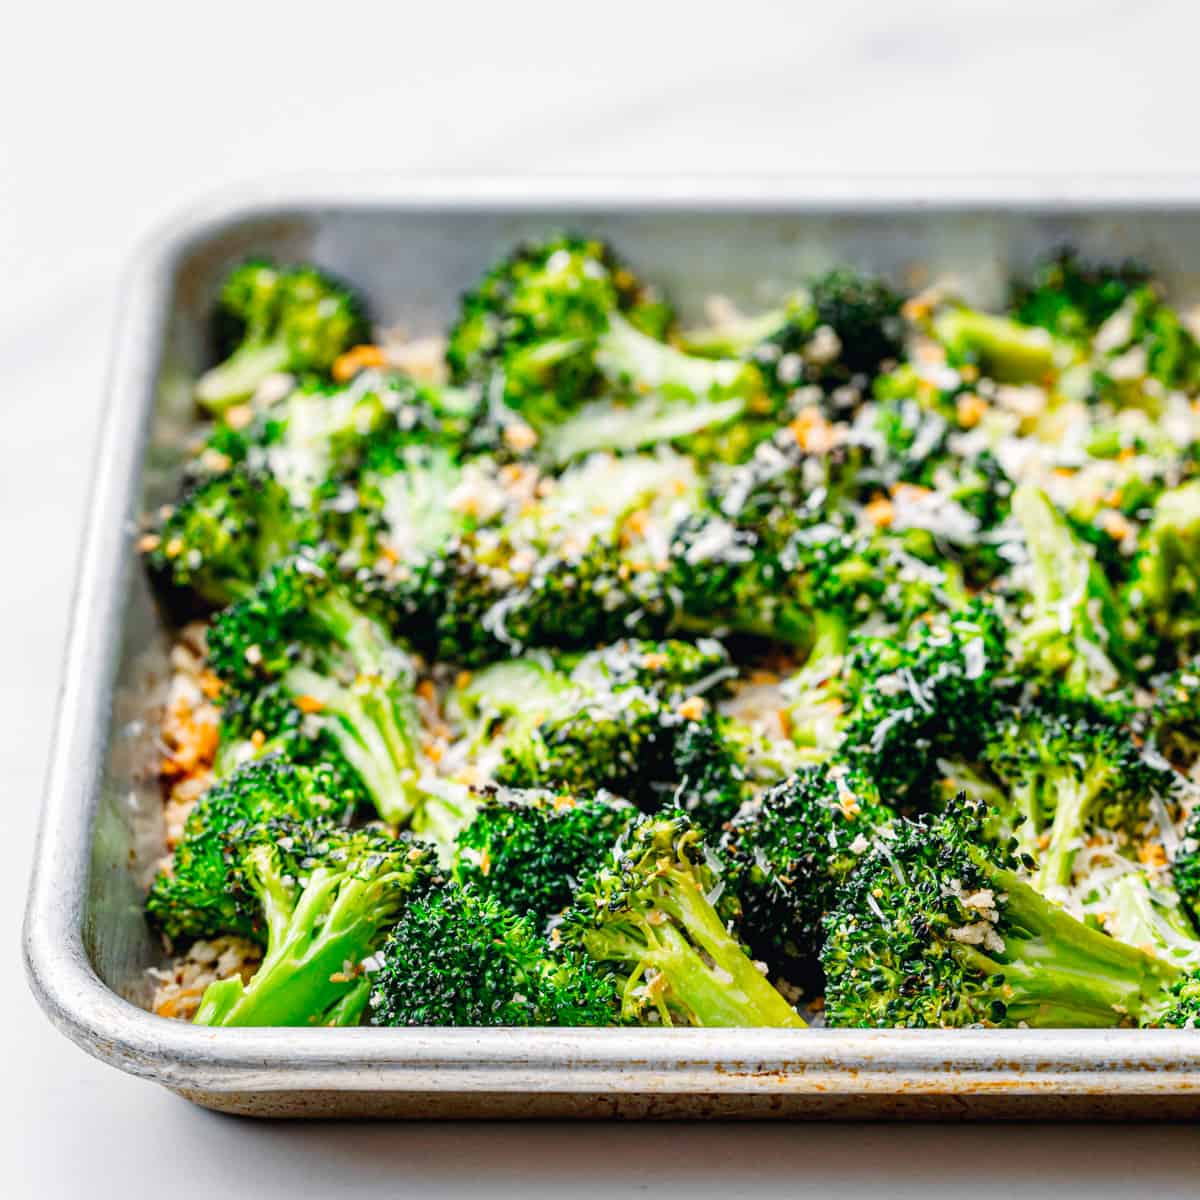 Roasted Broccoli with Panko Breadcrumbs and Parmesan.